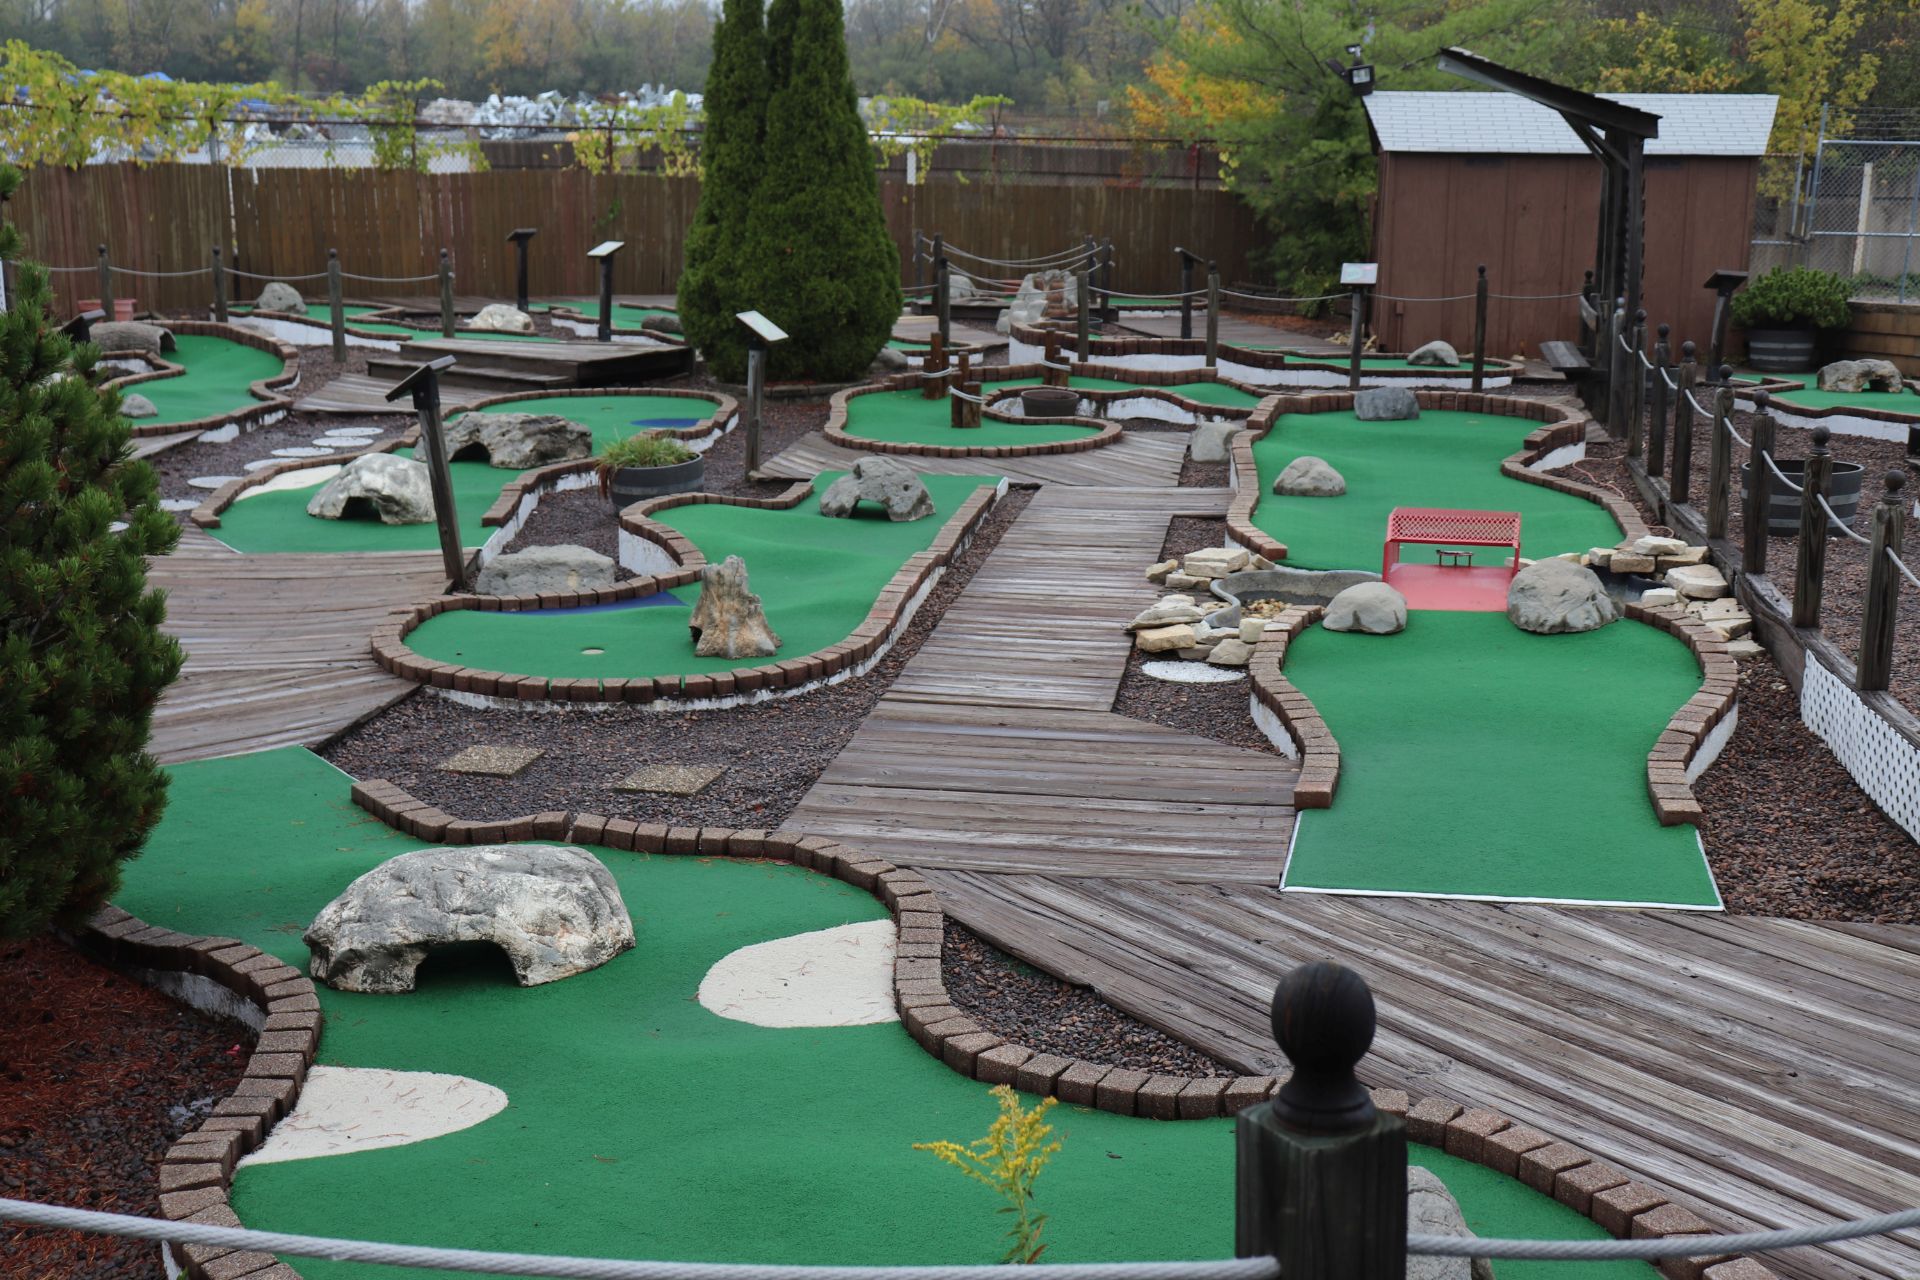 Modular 18-hole mini golf course by Micro Golf Cost of Wisconsin Inc., blueprints provided, carpet p